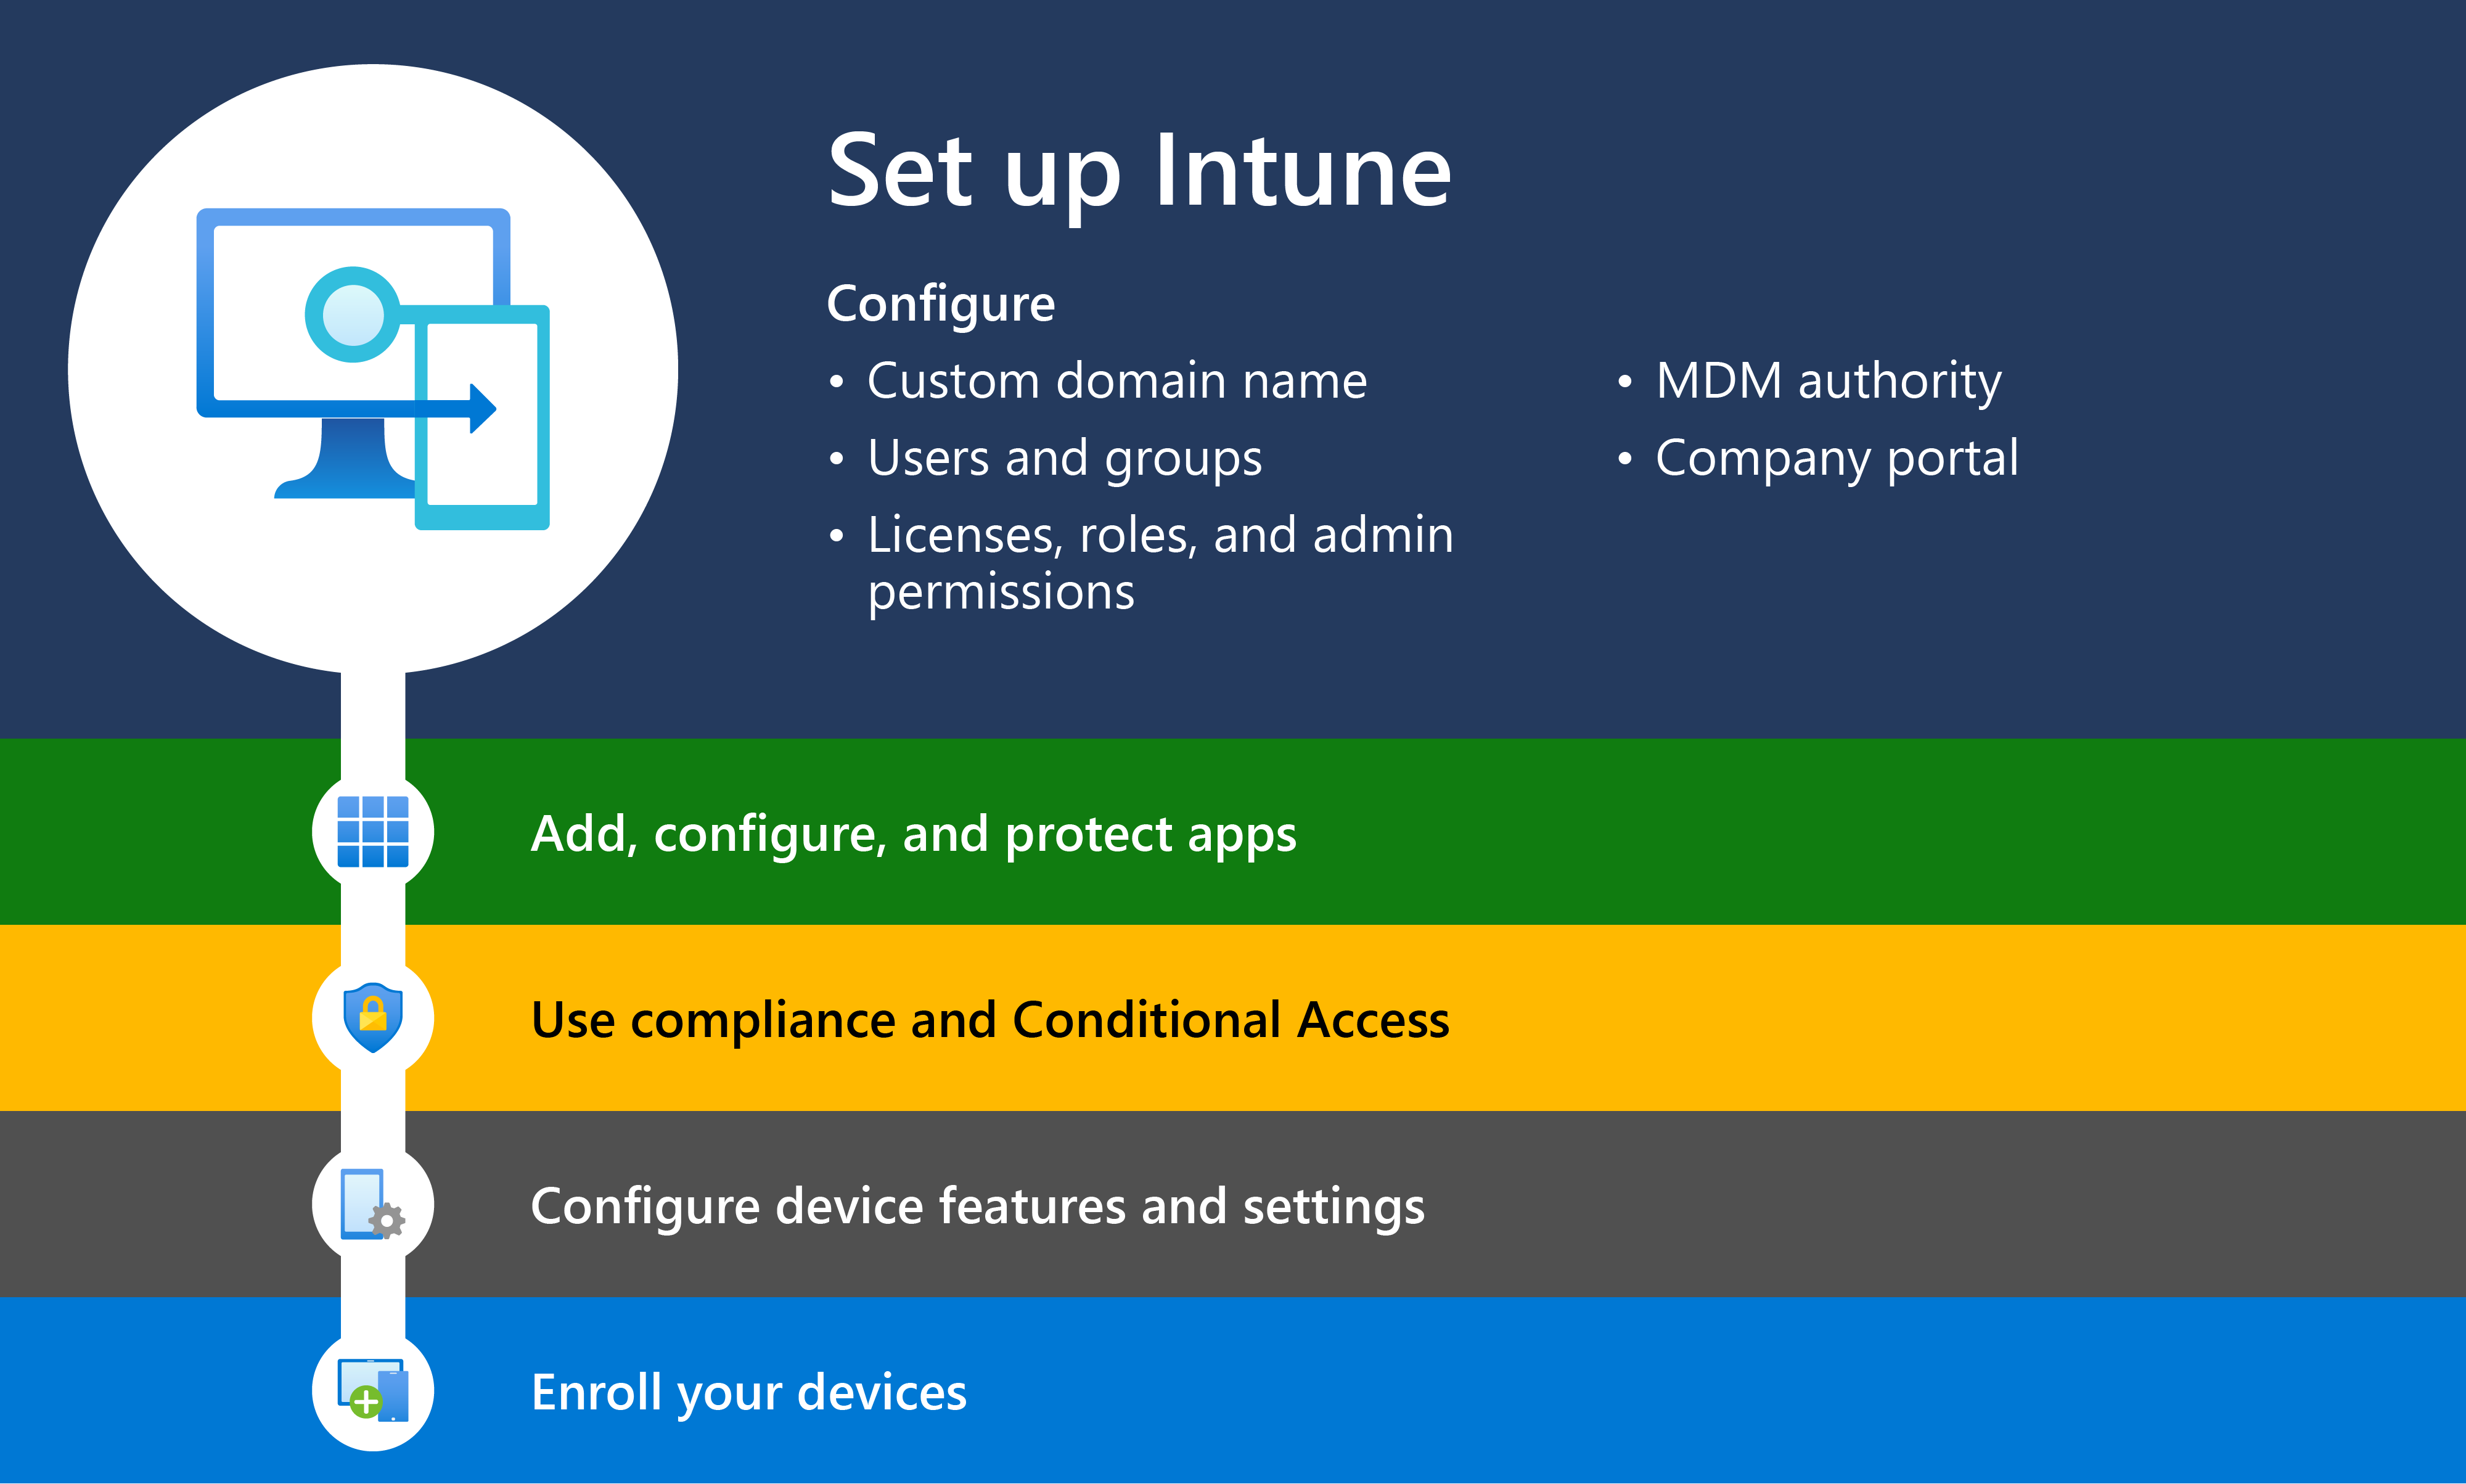 Diagram that shows getting started with Intune with step 1, which is setting up Microsoft Intune.